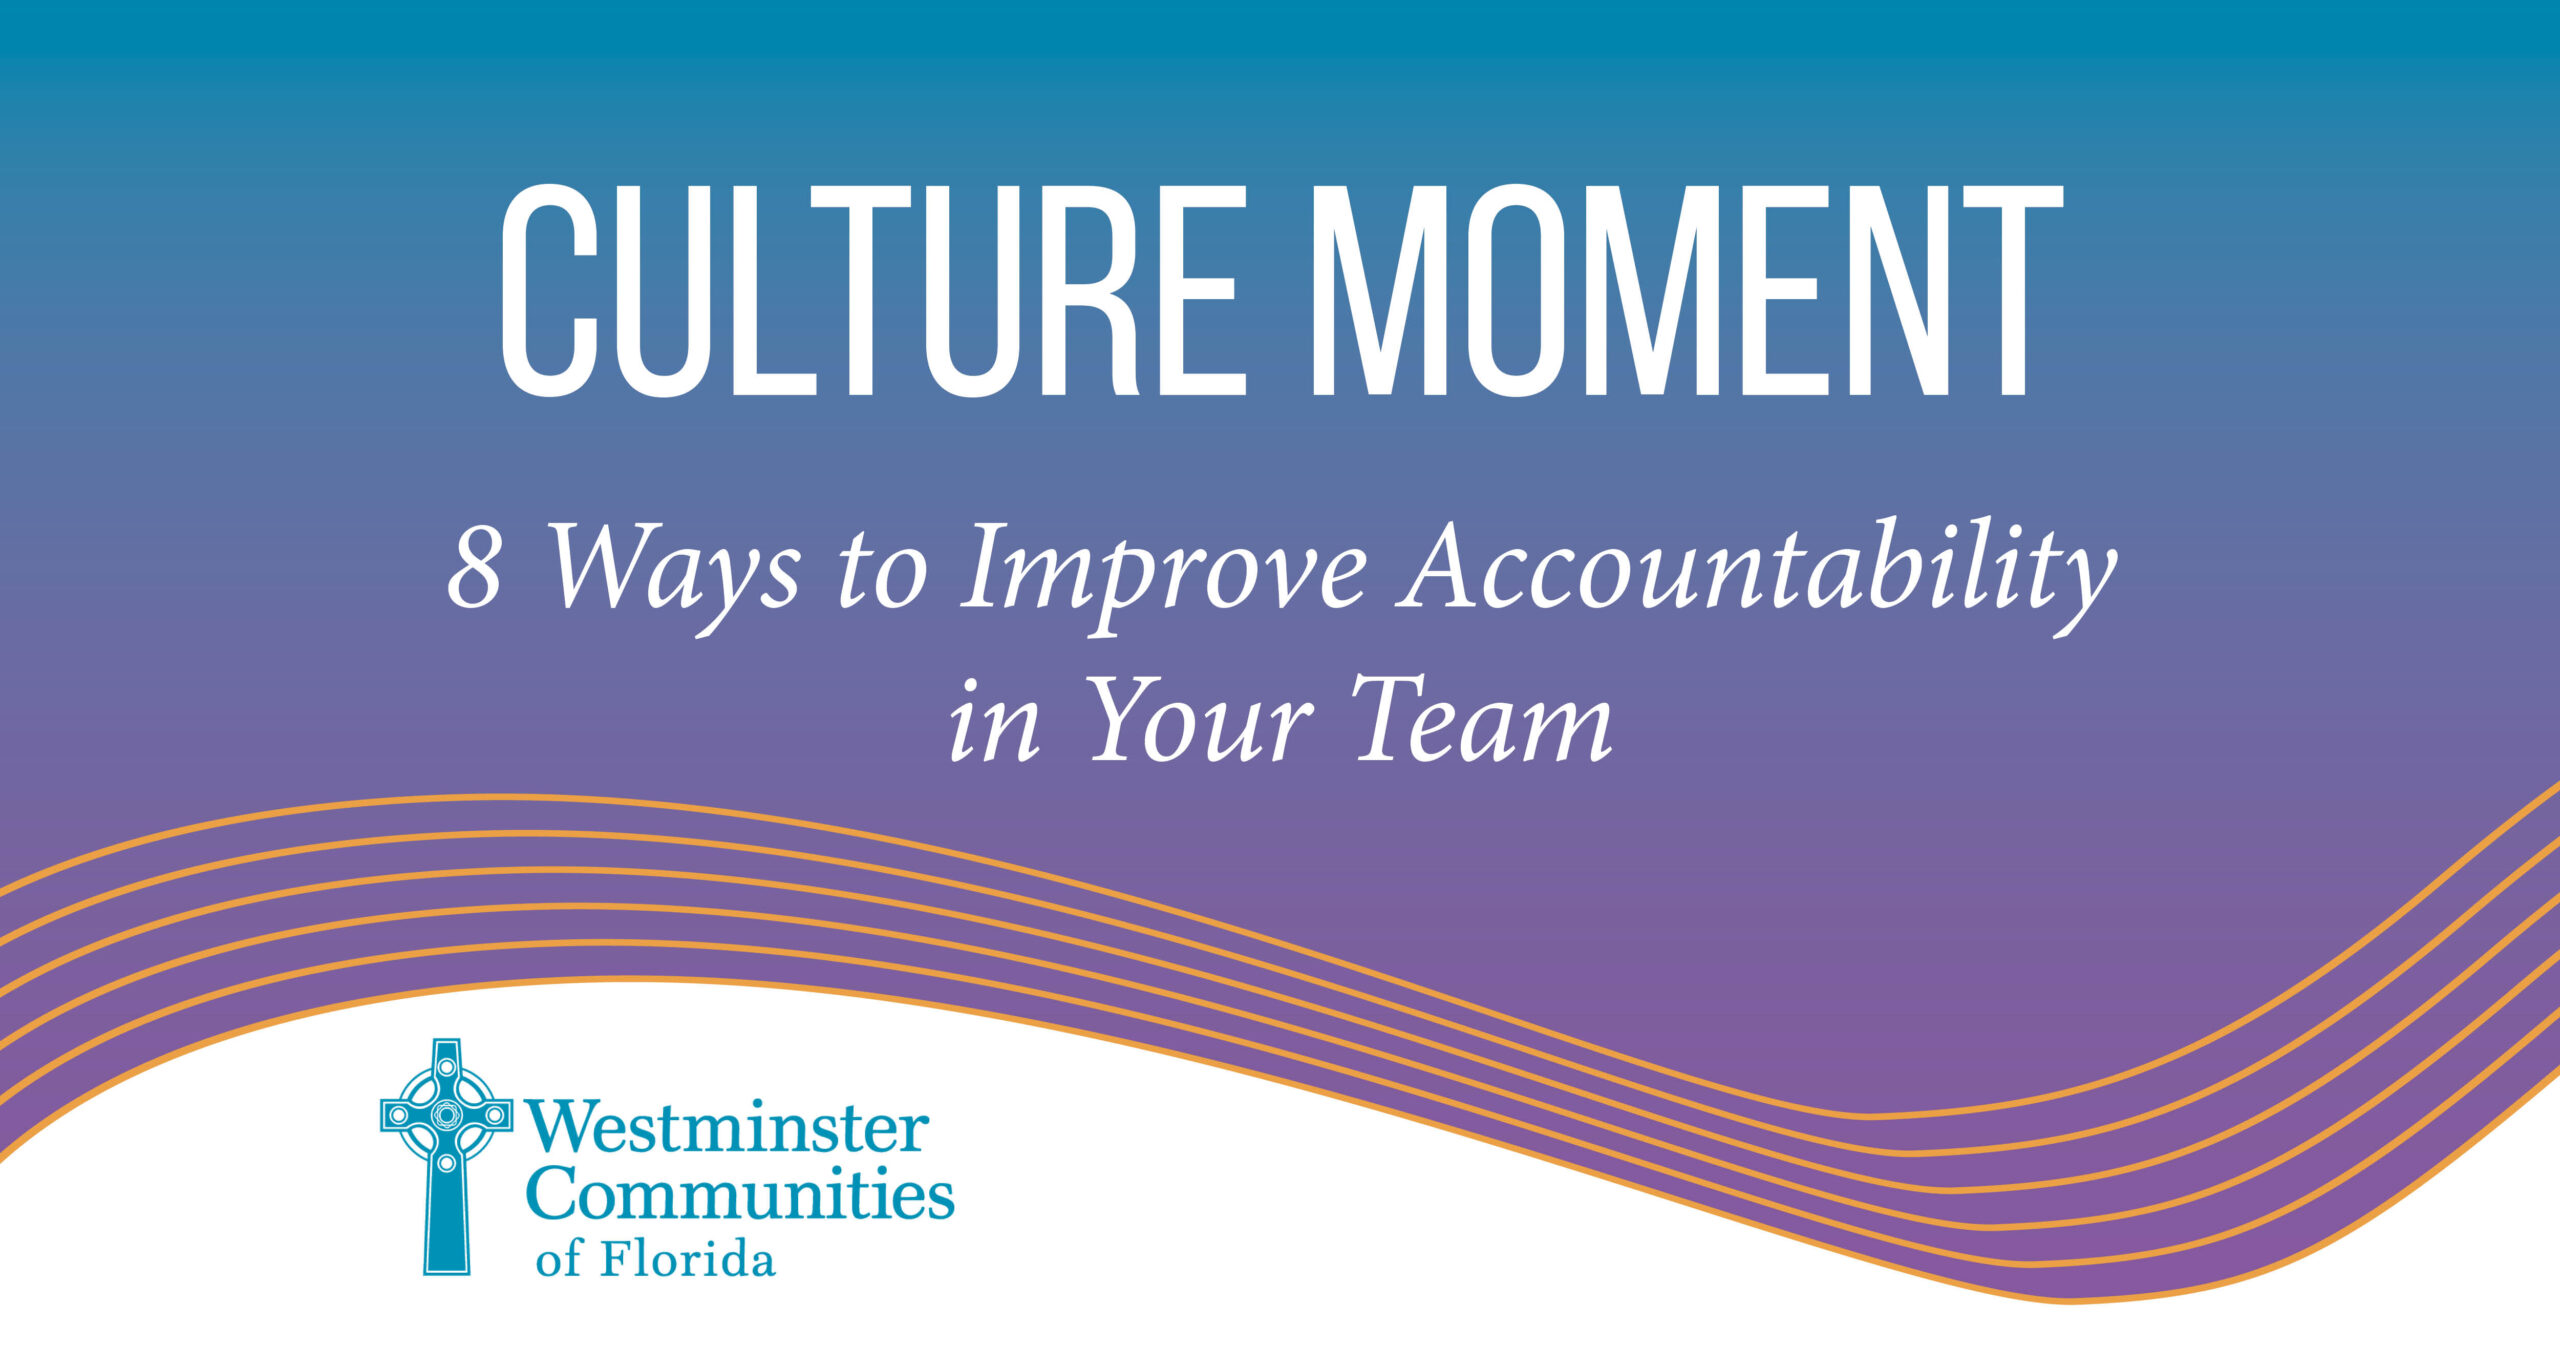 CULTURE MOMENT: 8 Ways to Improve Accountability in Your Team